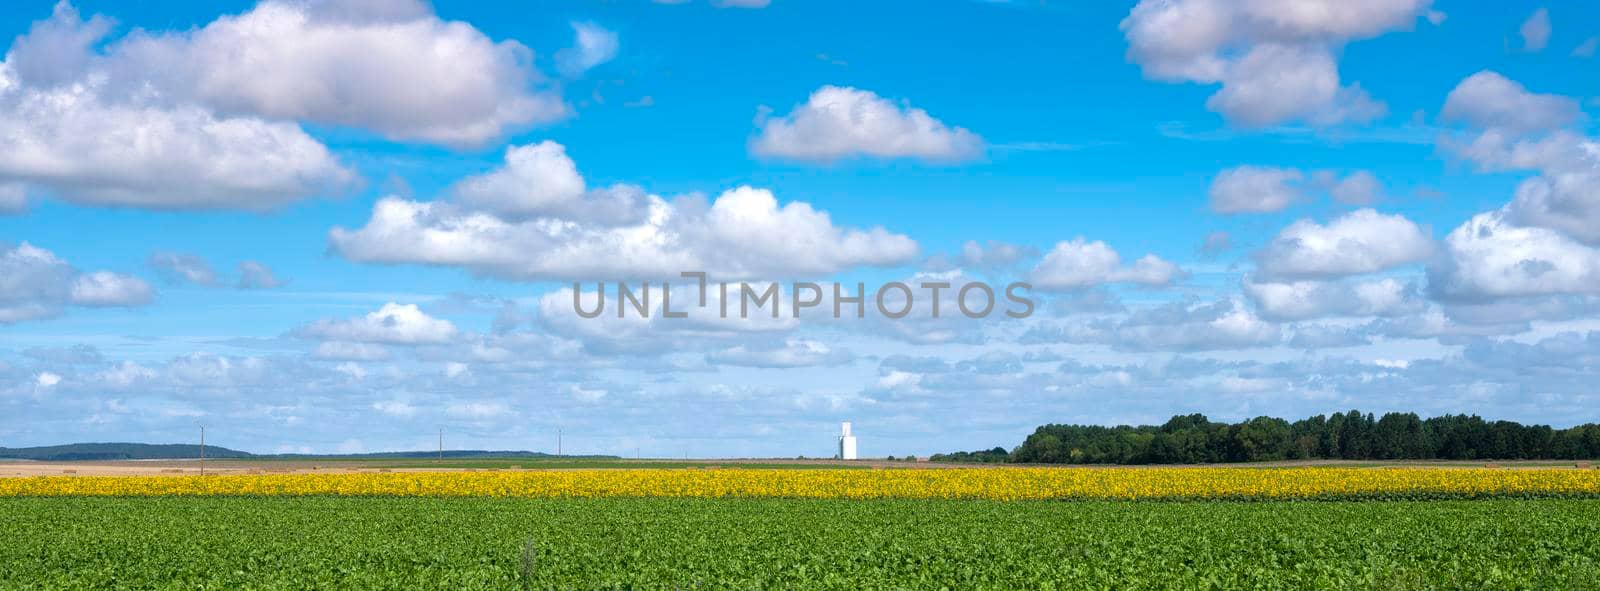 summer field with sunflowers under blue sky and white clouds in french champagne ardennes landscape near city of reims